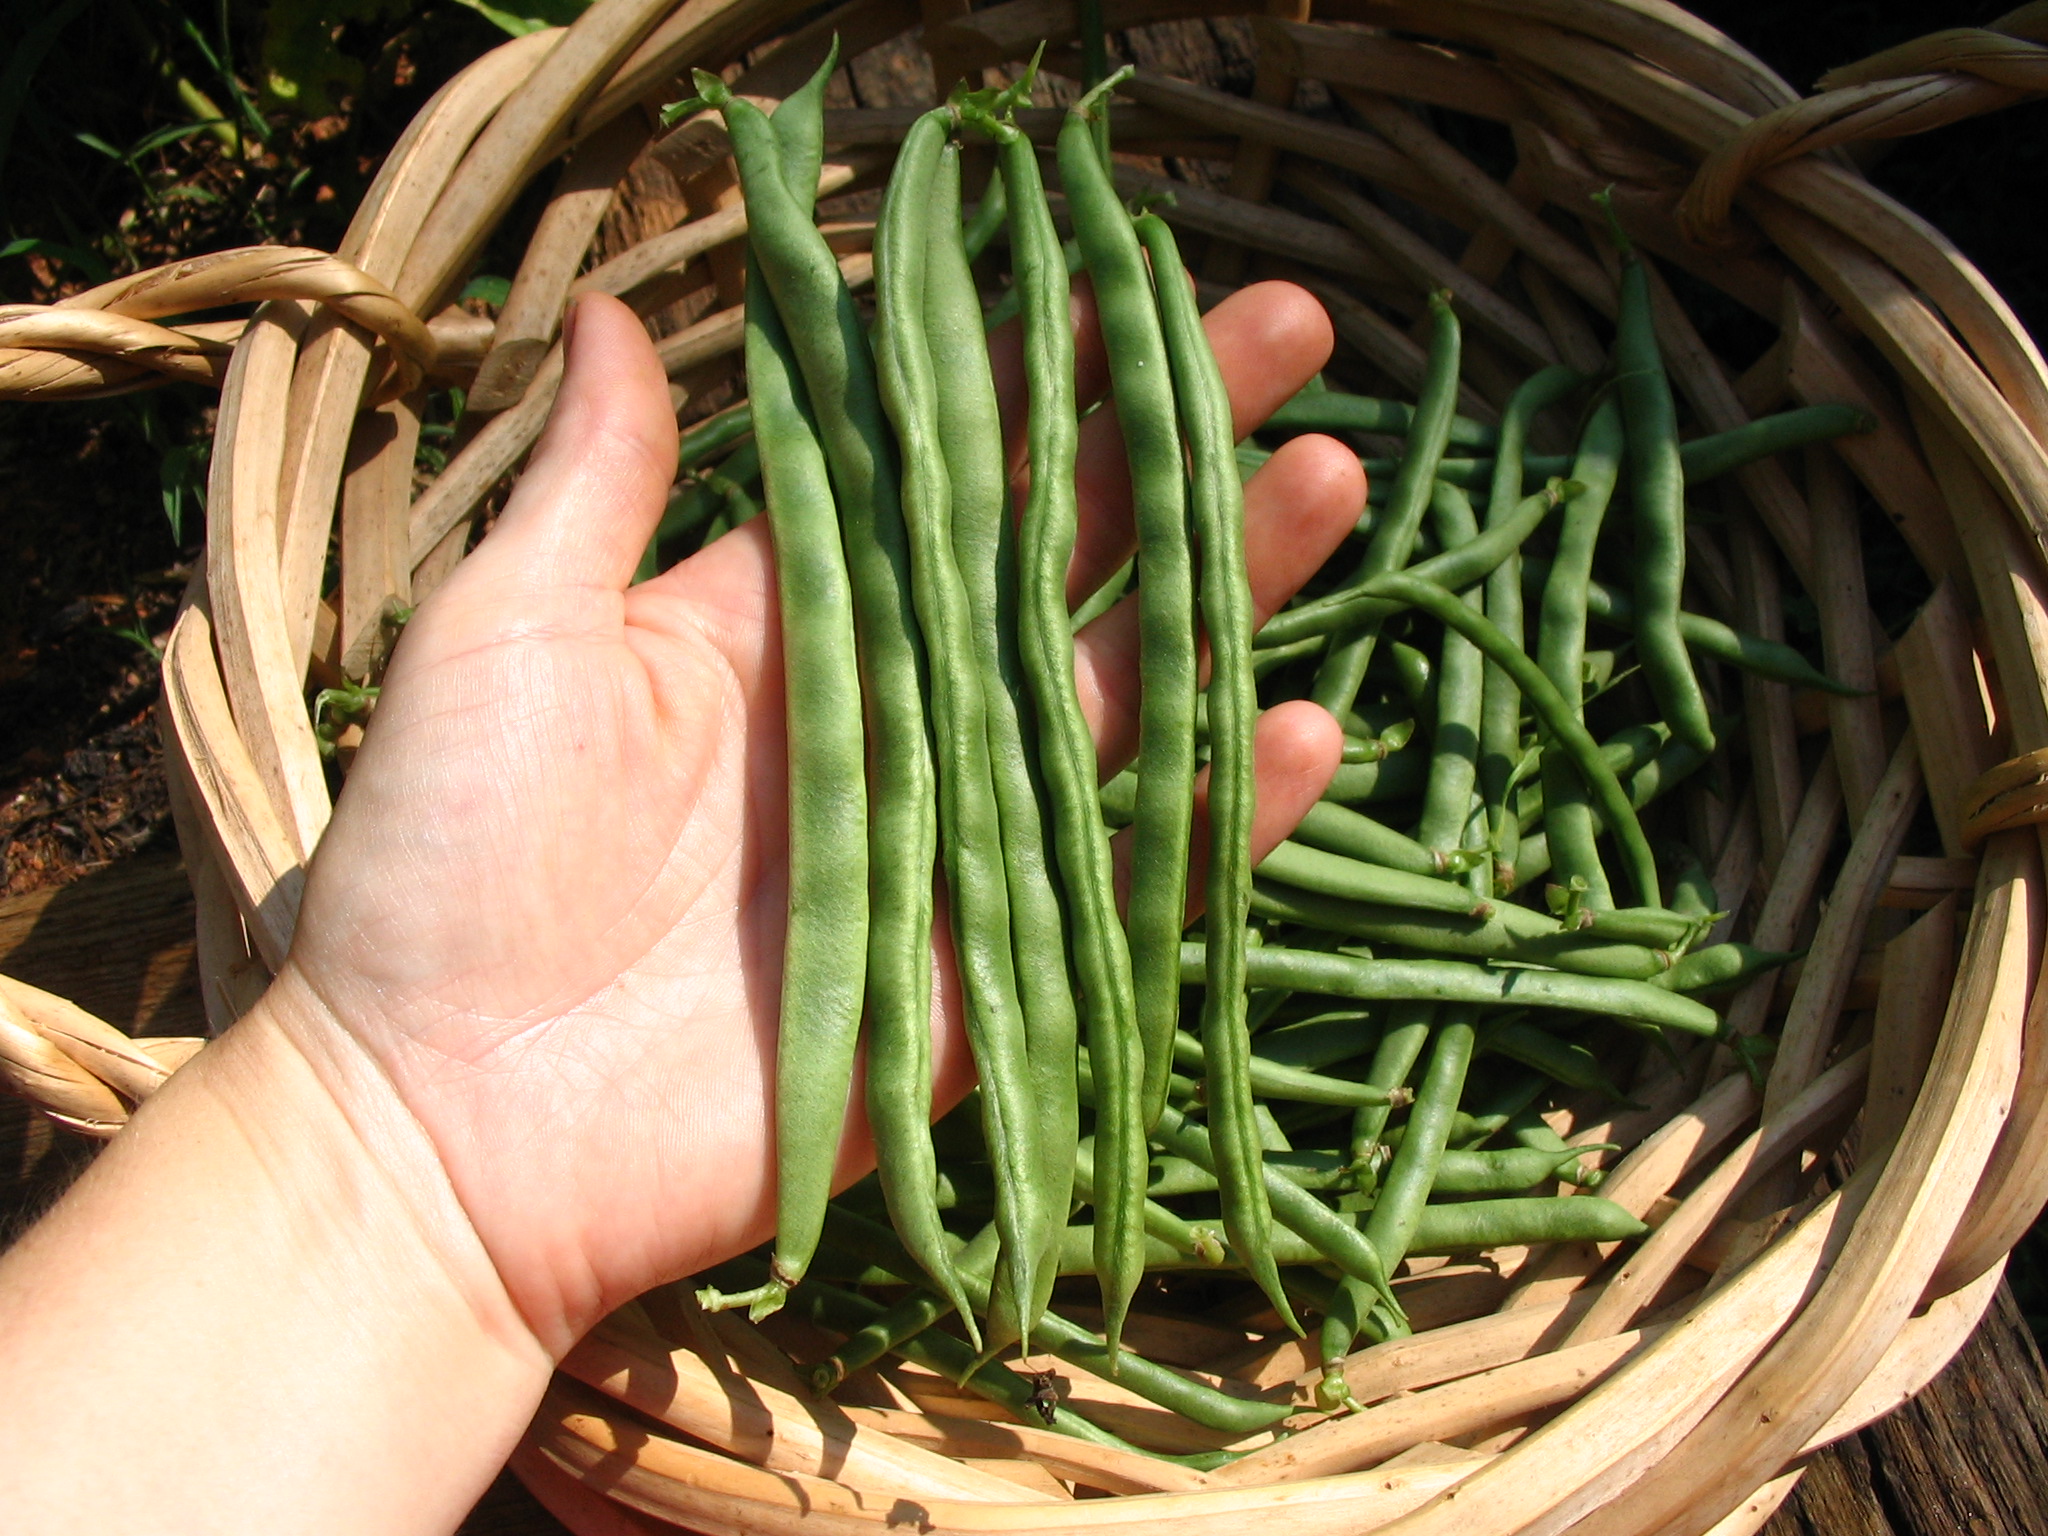 Our Lazy Housewife beans! We're eating some fresh, putting some up. Thanks, Lehman's!